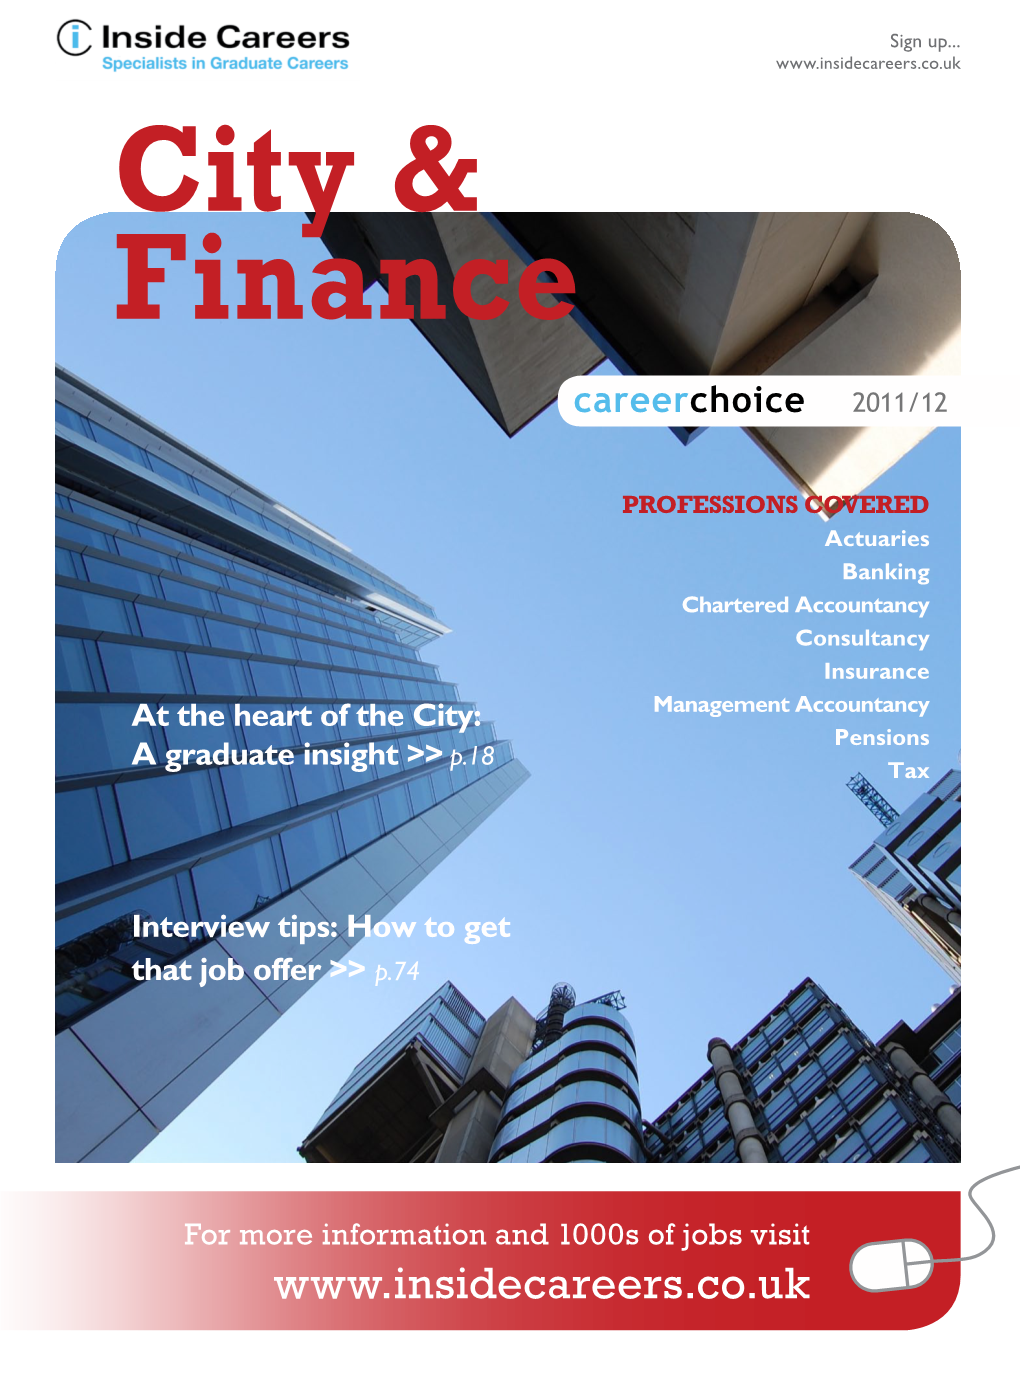 Chartered Accountancy Consultancy Insurance at the Heart of the City: Management Accountancy Pensions P.18 a Graduate Insight >> Tax